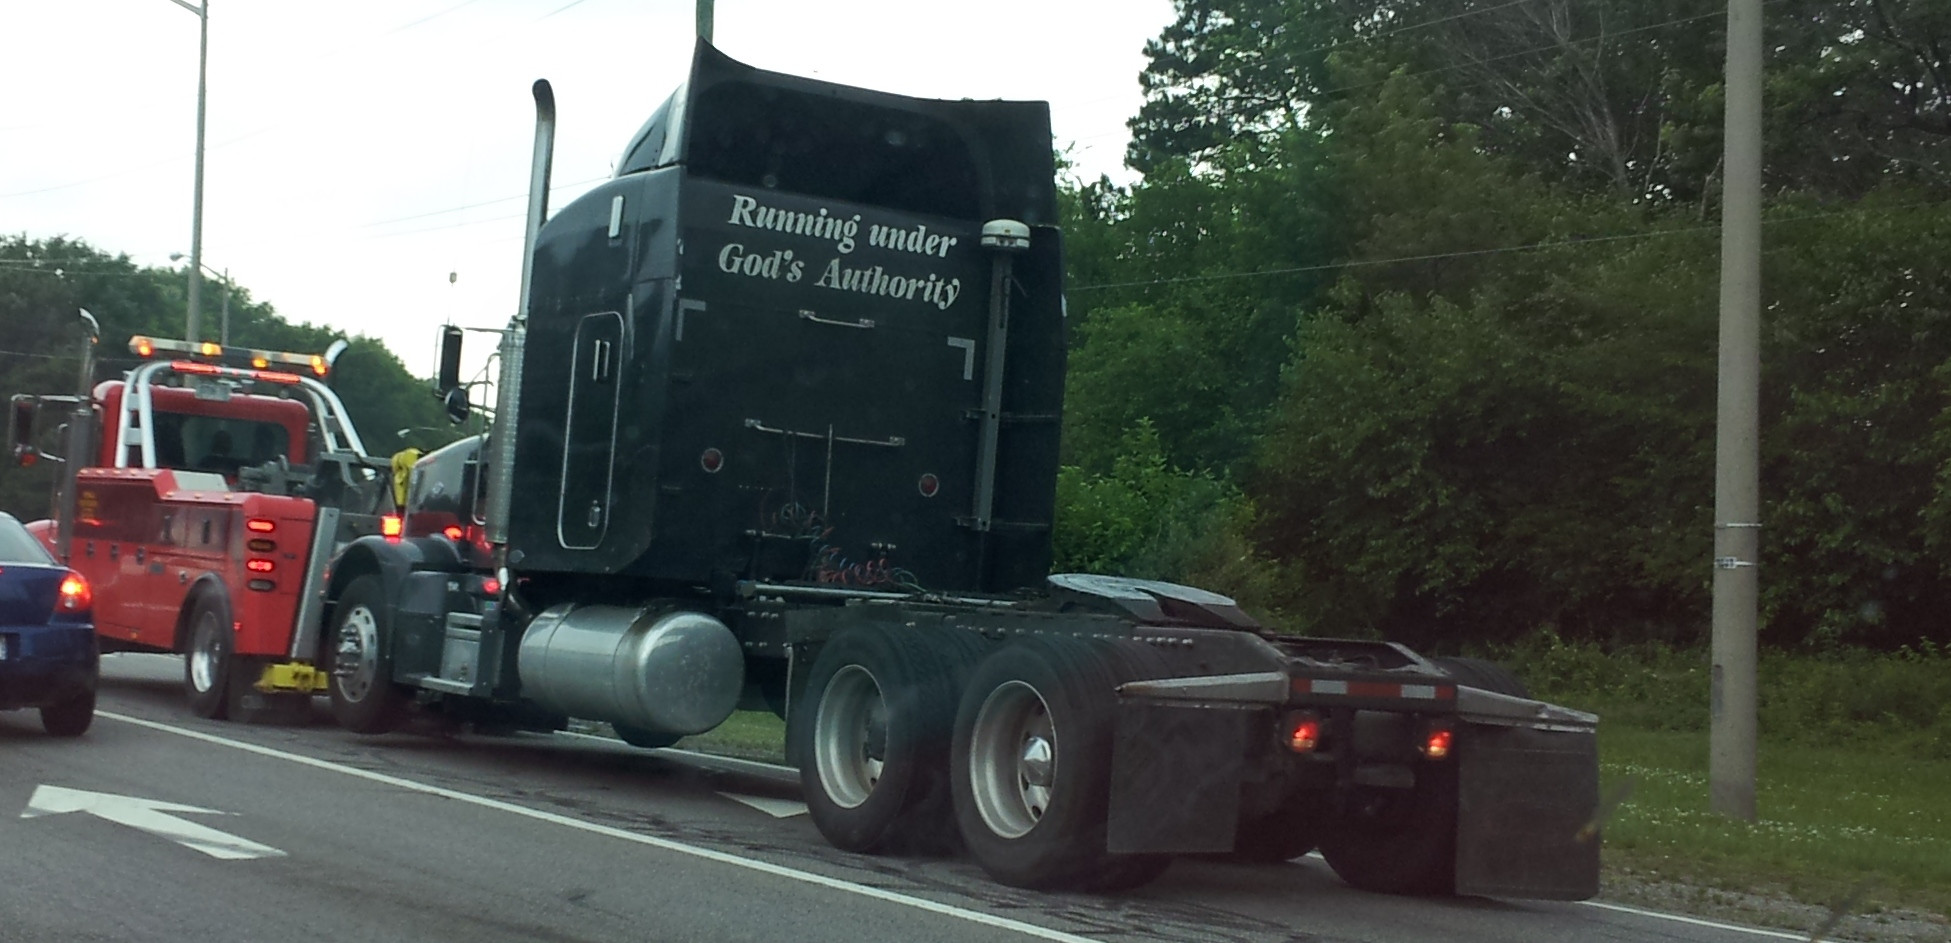 God's authority is getting towed.